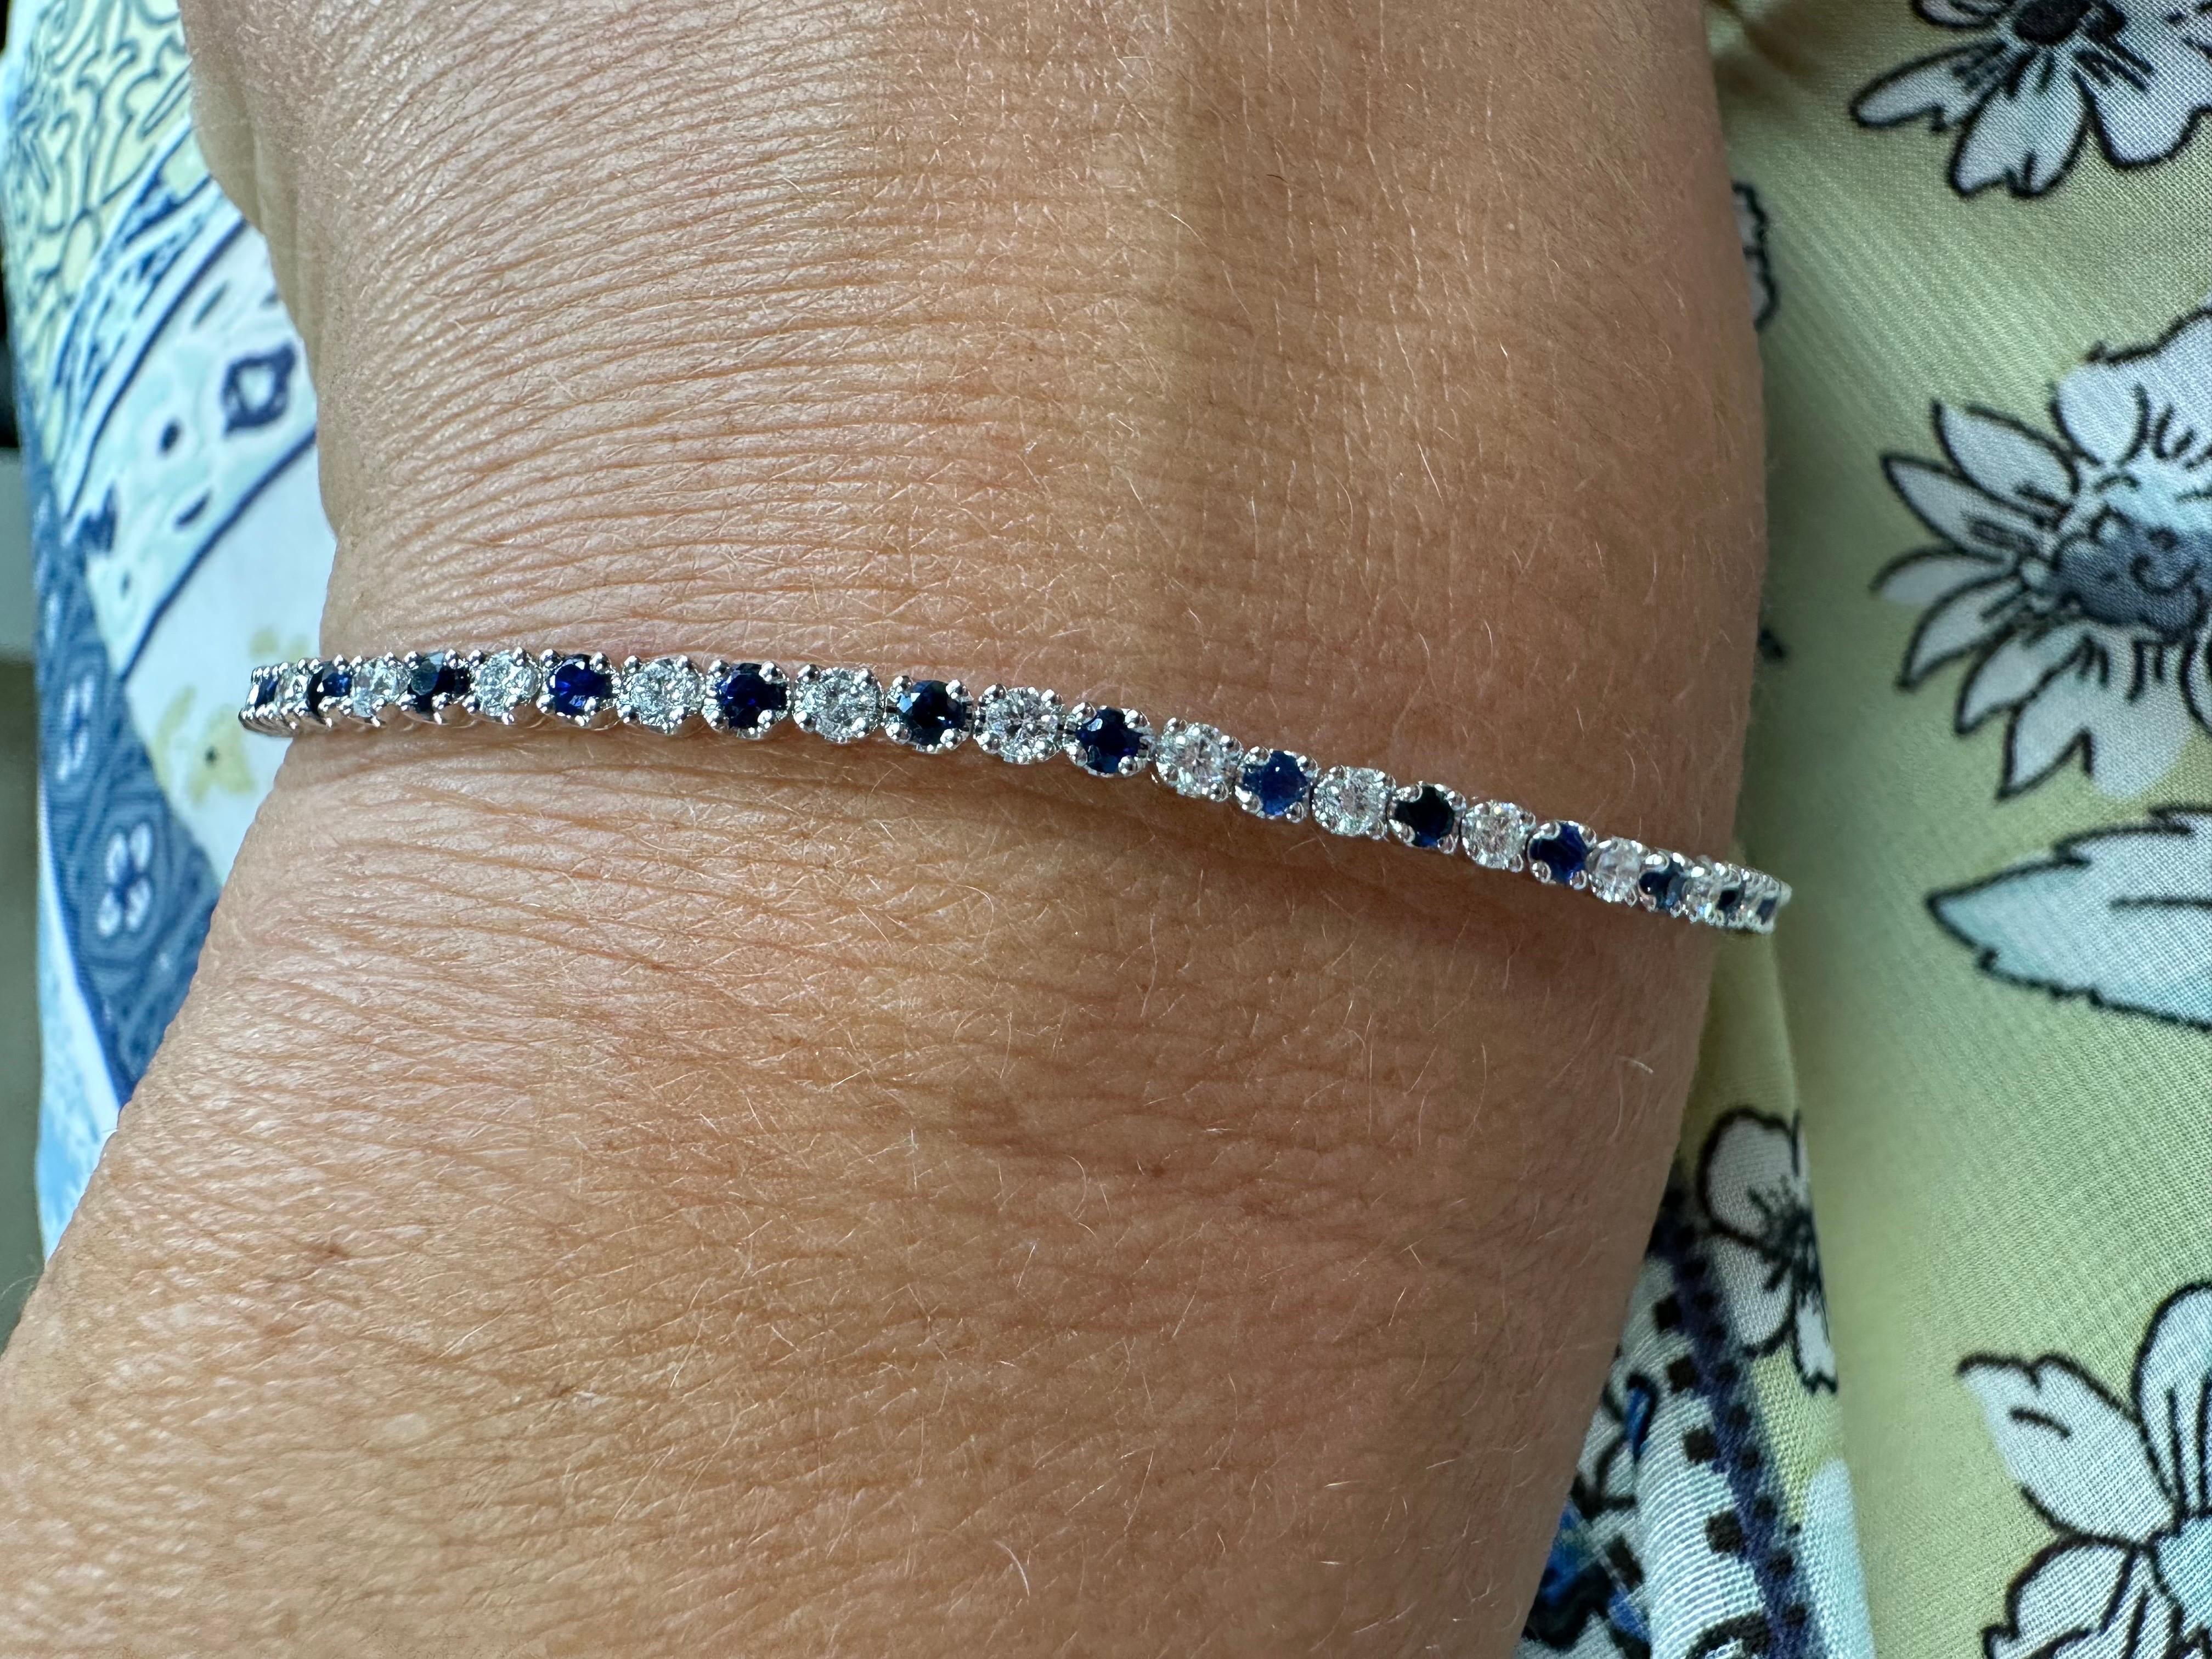 Stunning elegant diamond and sapphire bracelet in 14KT white gold. Tennis bracelet that looks good with anything!

GOLD: 14KT gold
NATURAL DIAMOND(S)
Clarity/Color: VS/G
Carat:1.23ct
NATURAL SAPPHIRE(S)
Clarity/Color: Slightly